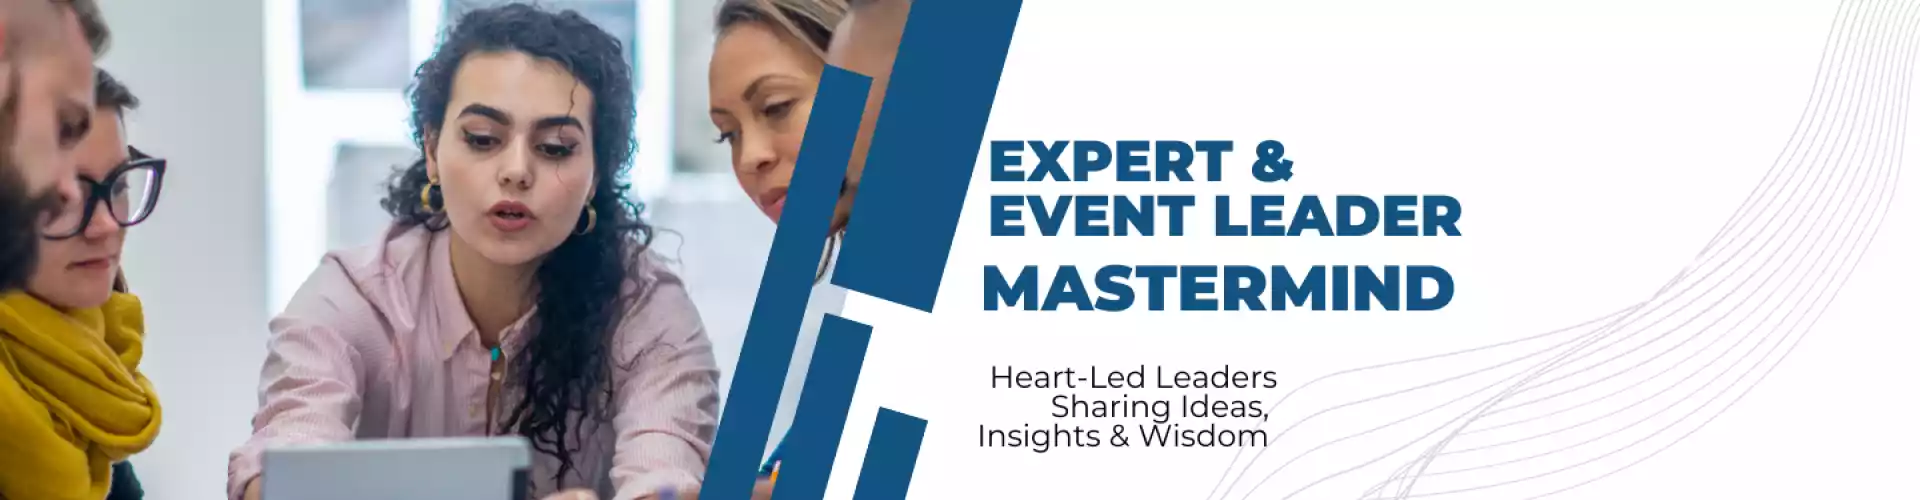 Expert and Event Leader Mastermind